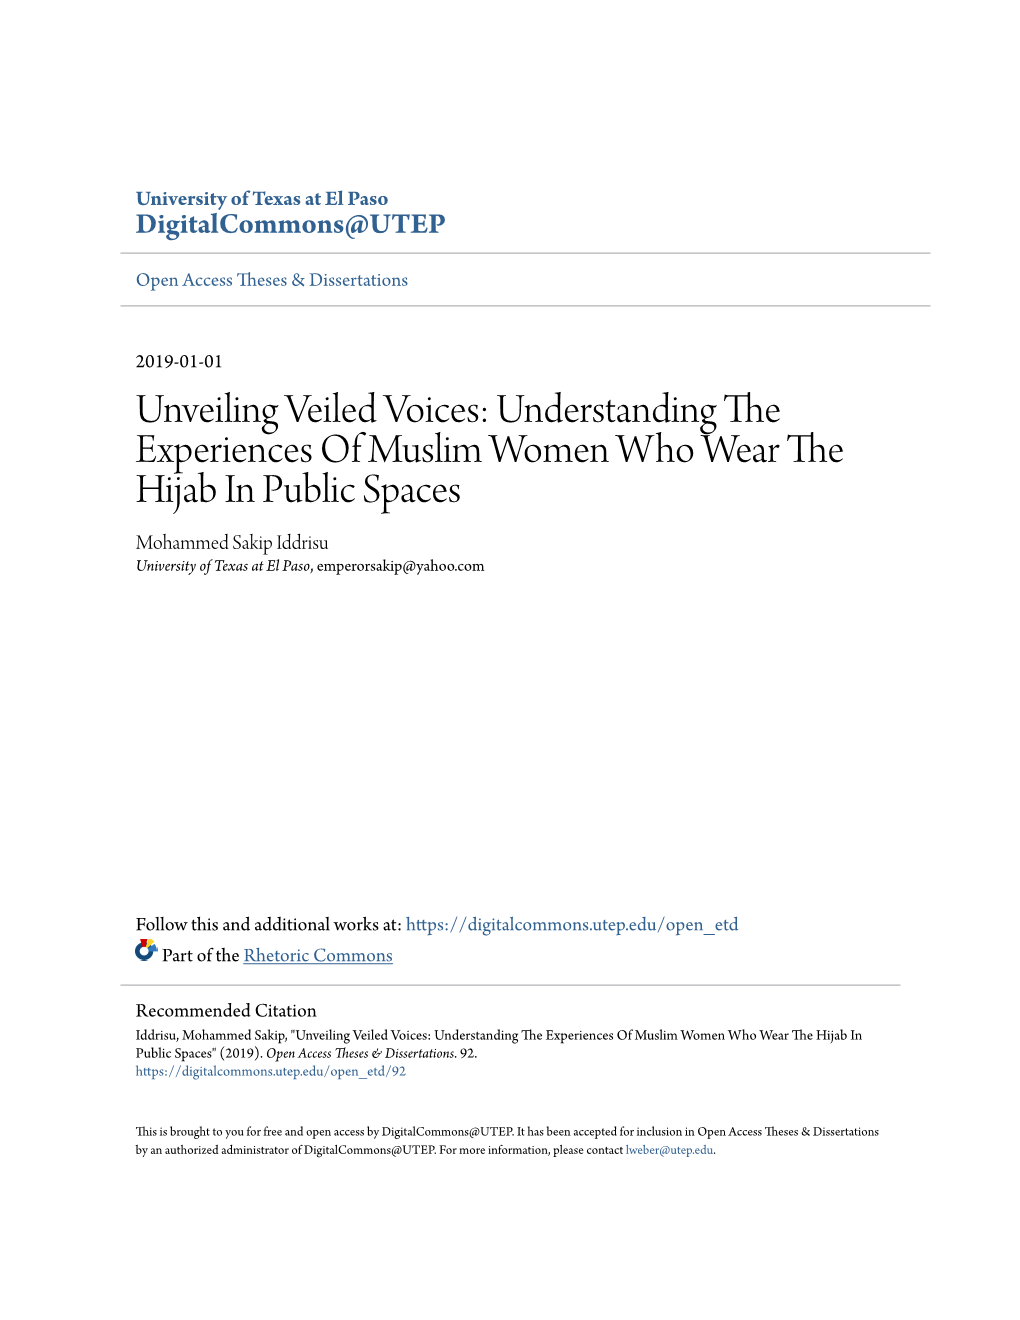 Understanding the Experiences of Muslim Women Who Wear the Hijab in Public Spaces Mohammed Sakip Iddrisu University of Texas at El Paso, Emperorsakip@Yahoo.Com